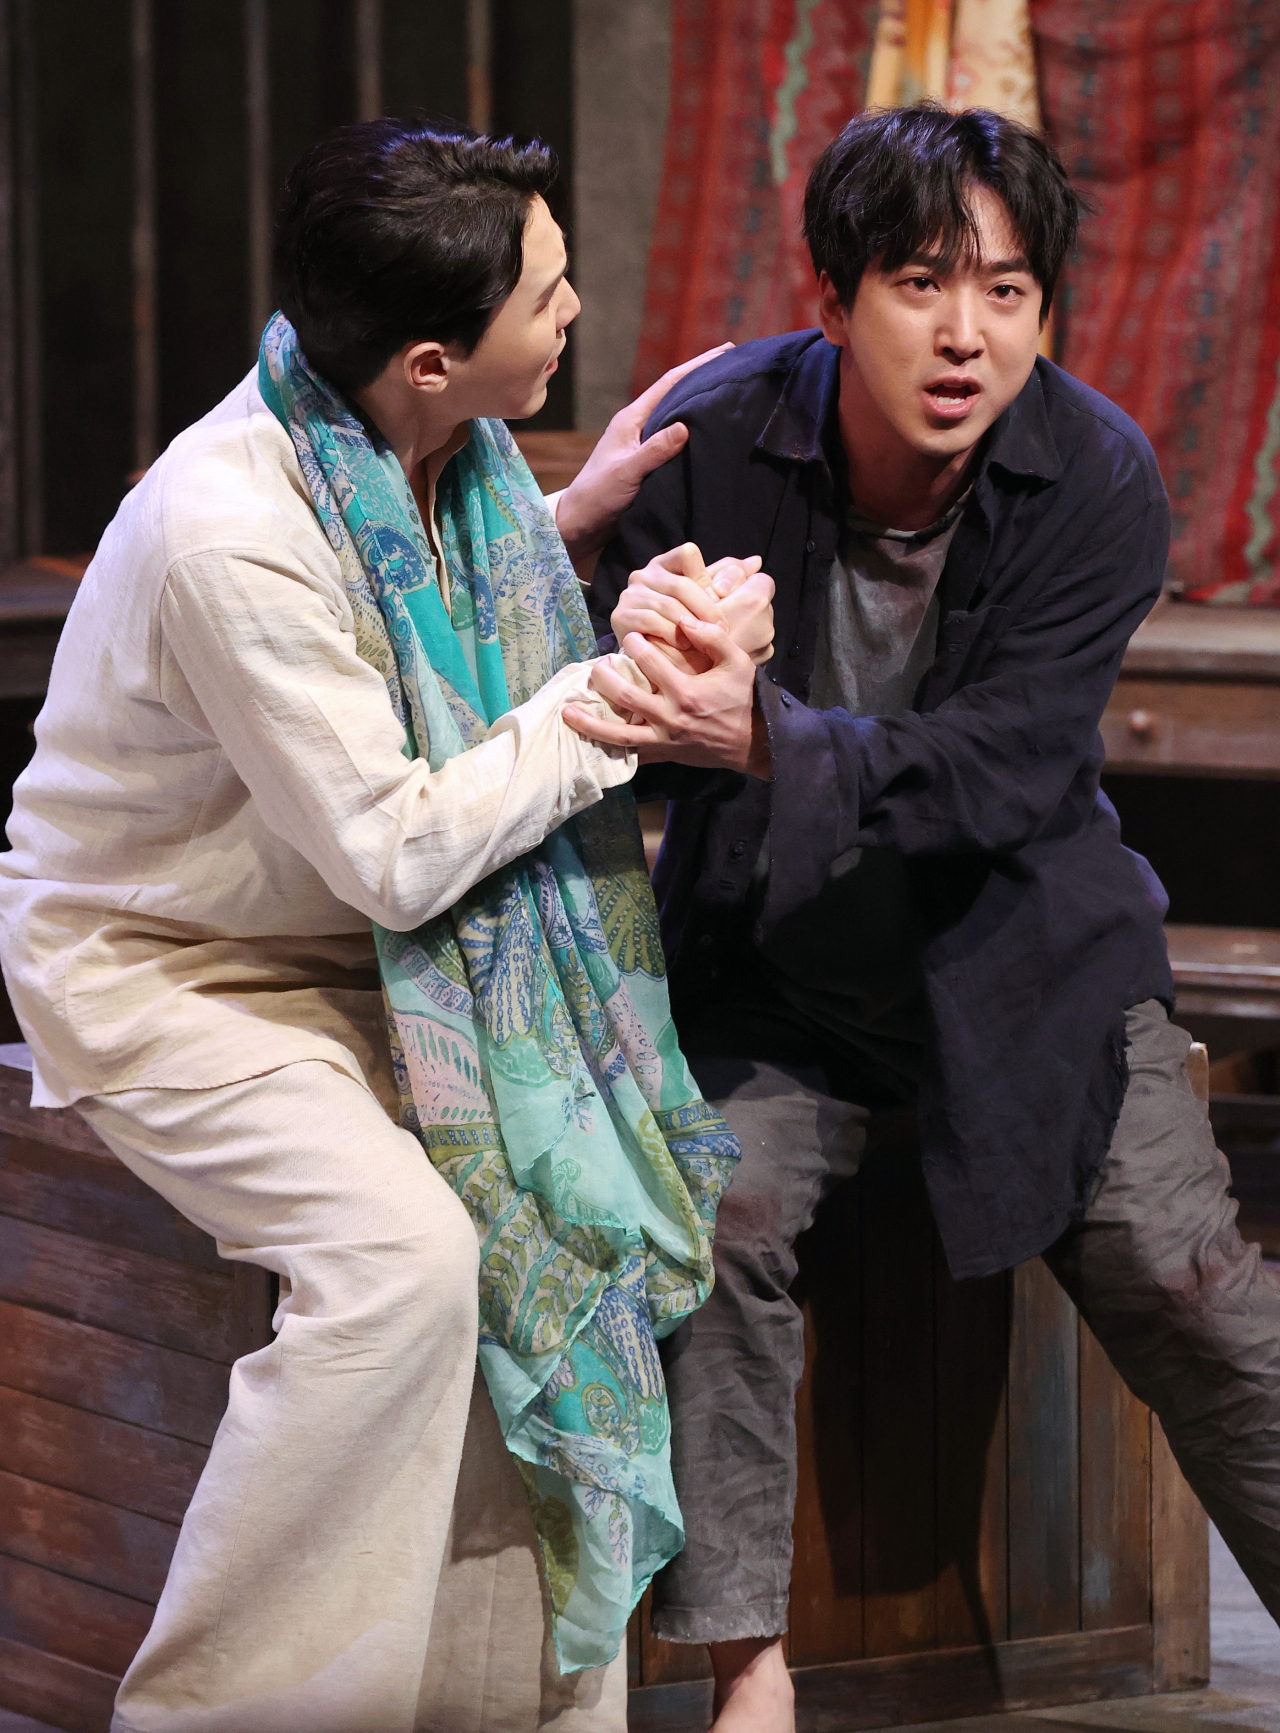 Yi Youll (left) and Cha Sun-woo plays Molina and Valentin, respectively, in the play 